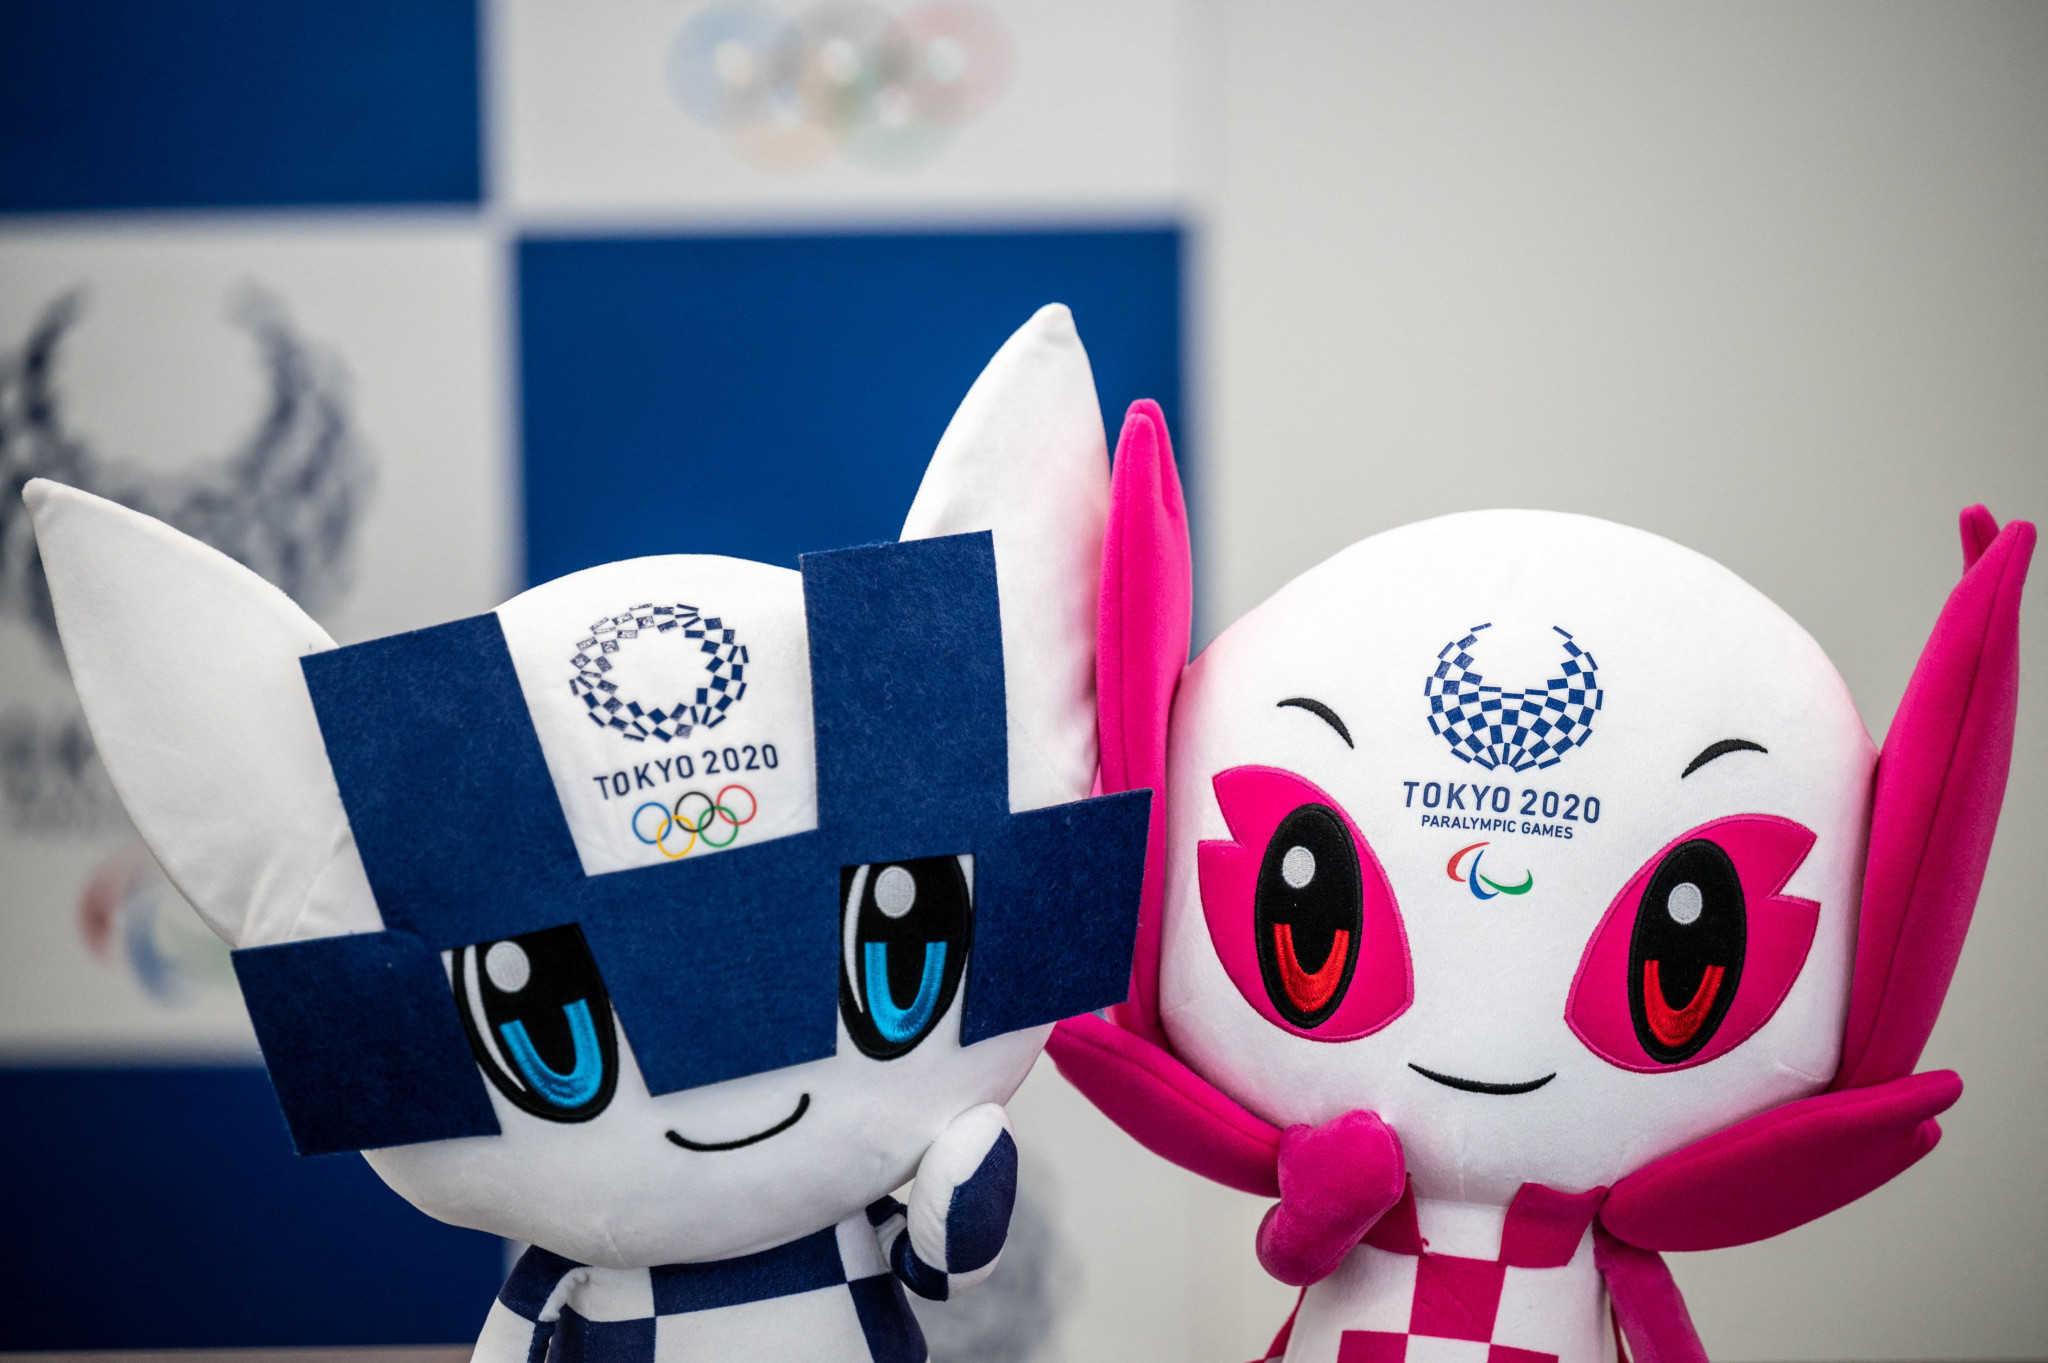 Sun Arrow sold mascots for the Tokyo Olympic and Paralympic Games ©Getty Images